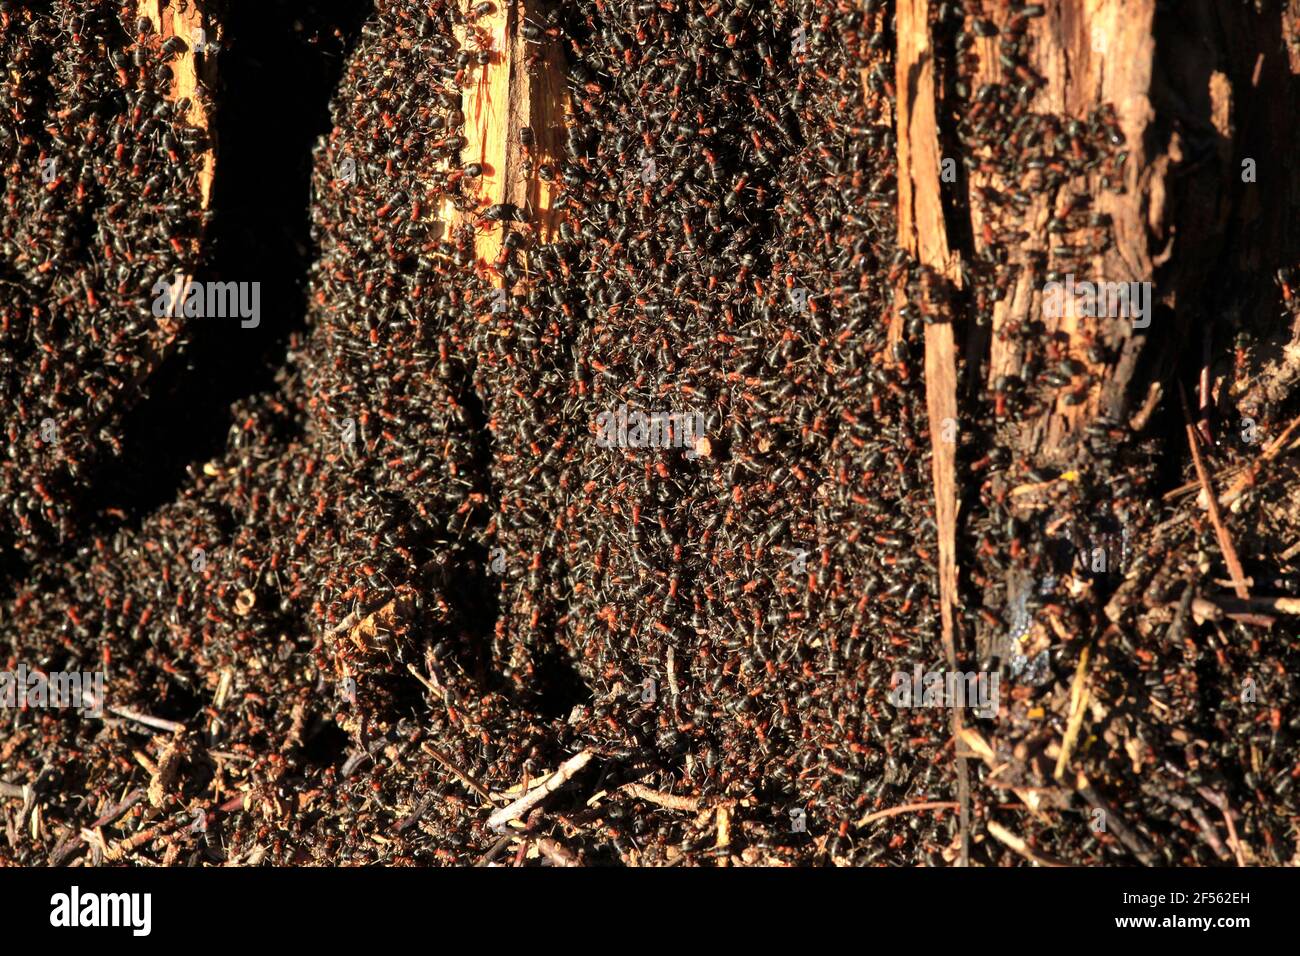 Black and red ants crawling in anthill Stock Photo